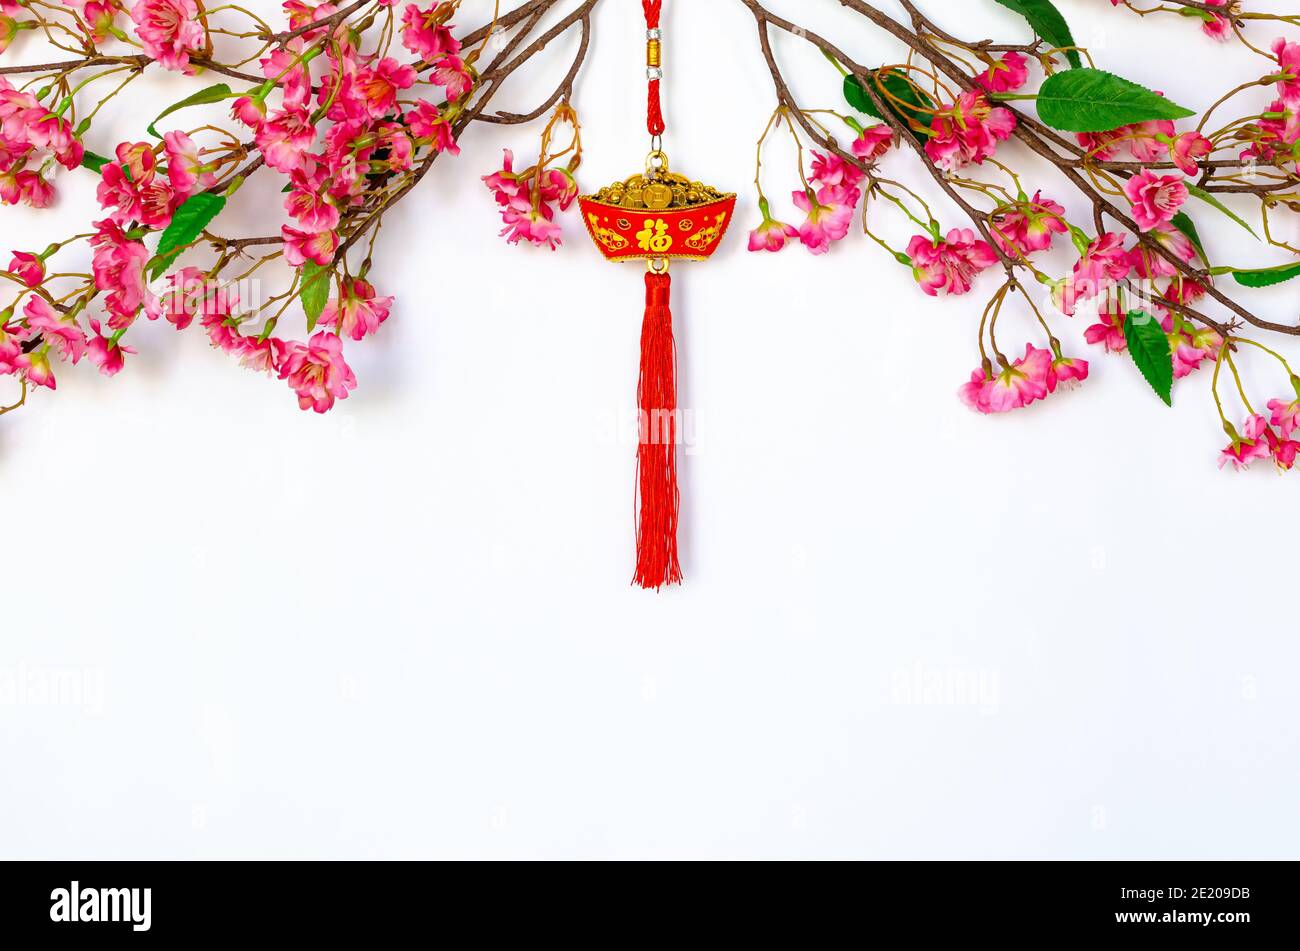 Hanging pendant for Chinese new year ornament (meaning of word is wealth)  with Chinese blossom flowers on white background Stock Photo - Alamy